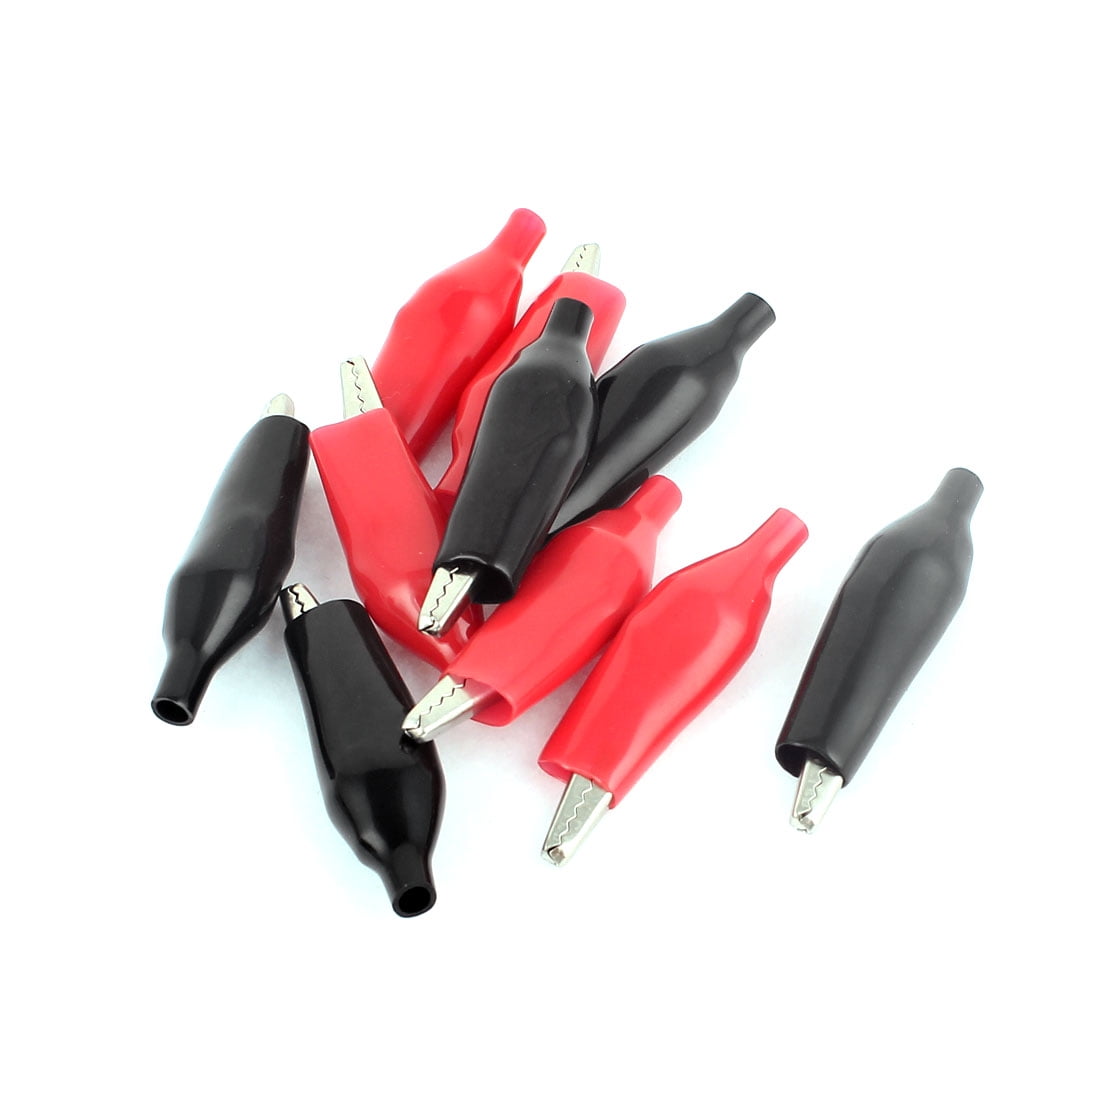 10 Pcs Insulated Electrical Alligator Clips Large-sized Black Red Clamps 